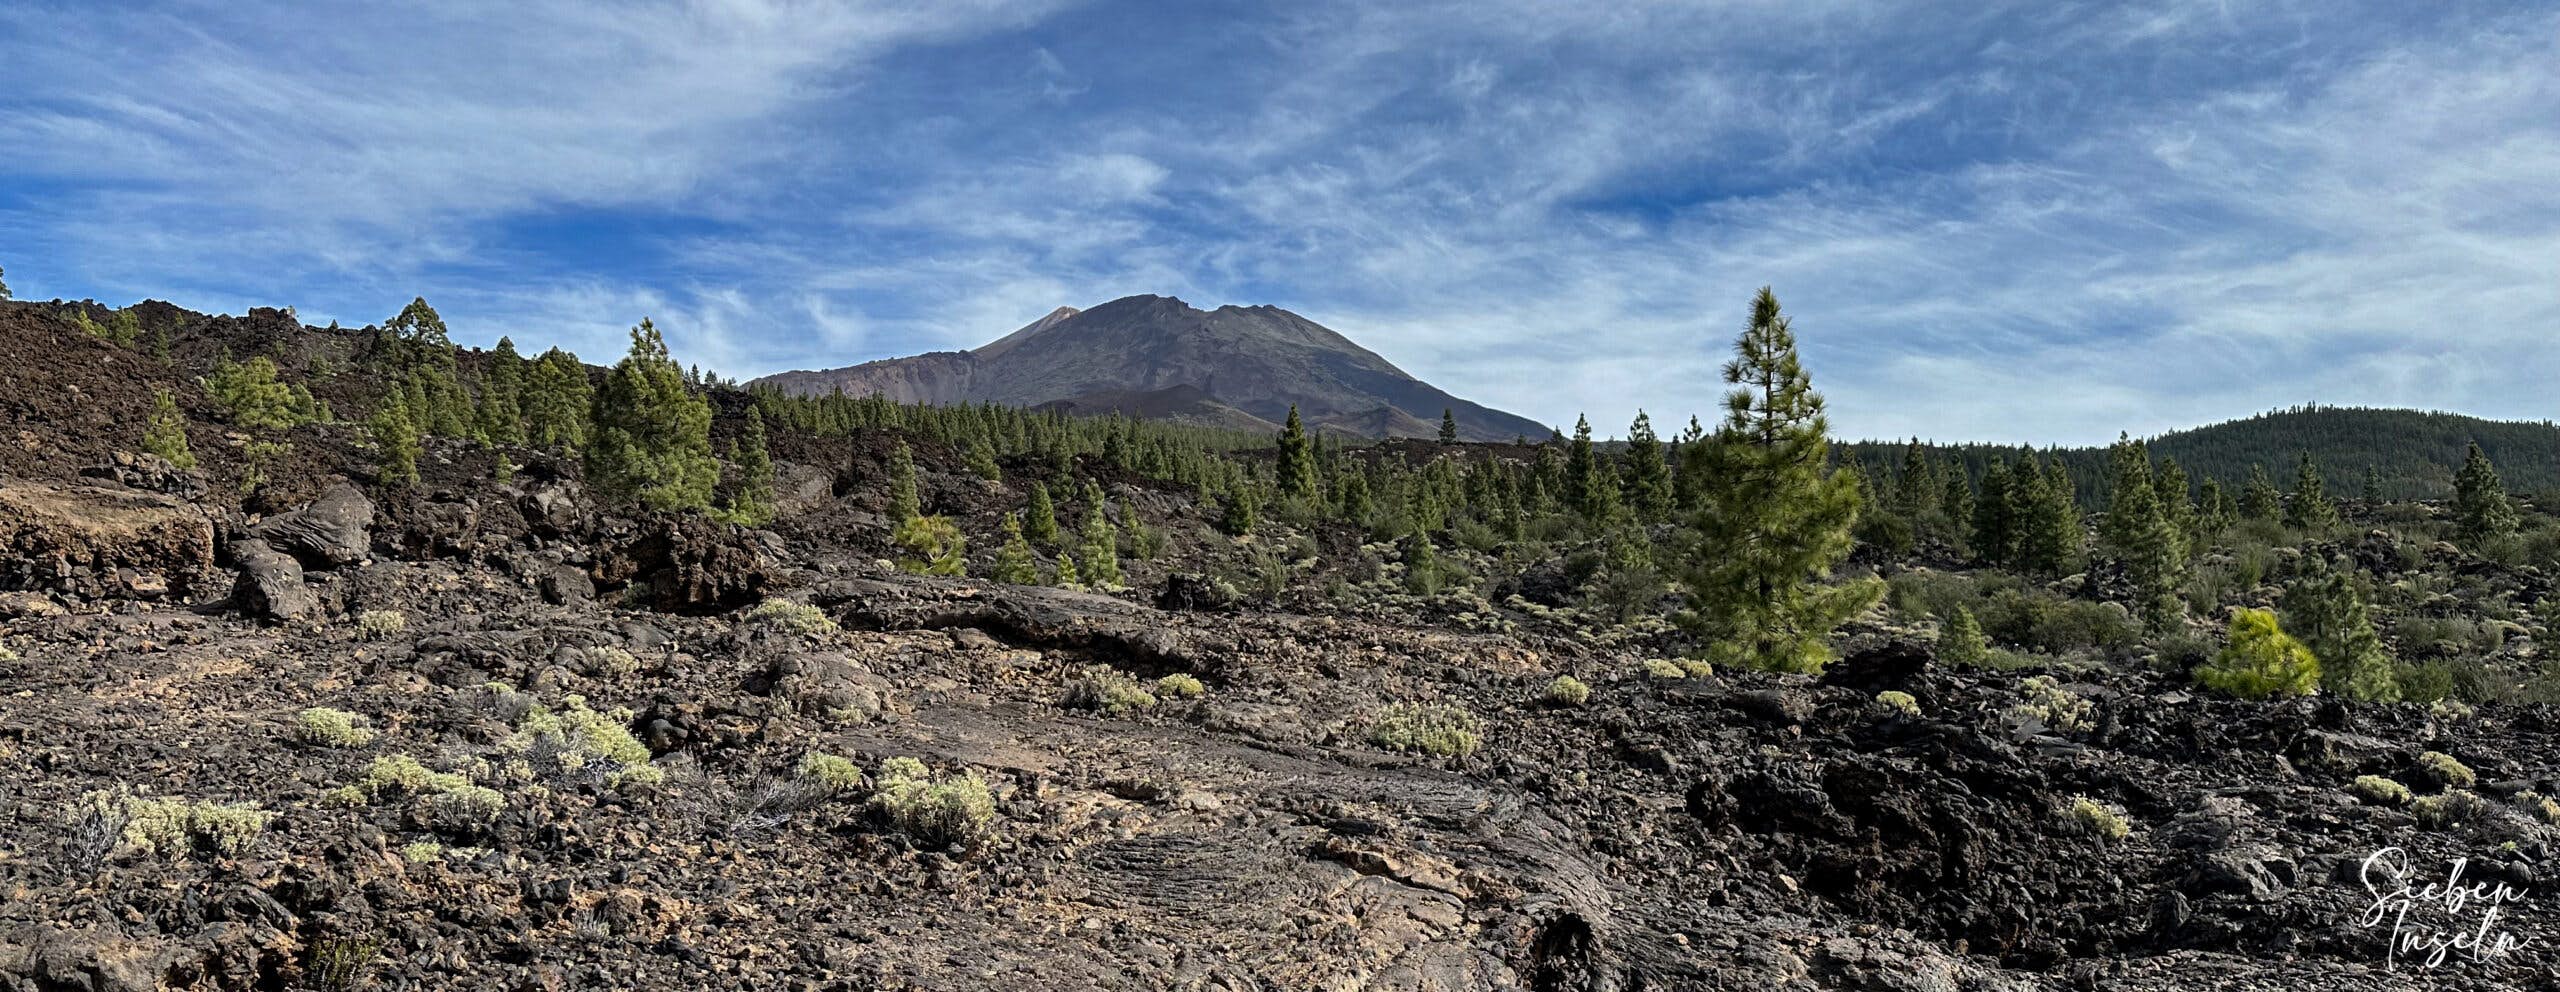 Hiking trail through volcanic rock and pine trees with views of the Teide and Pico Viejo